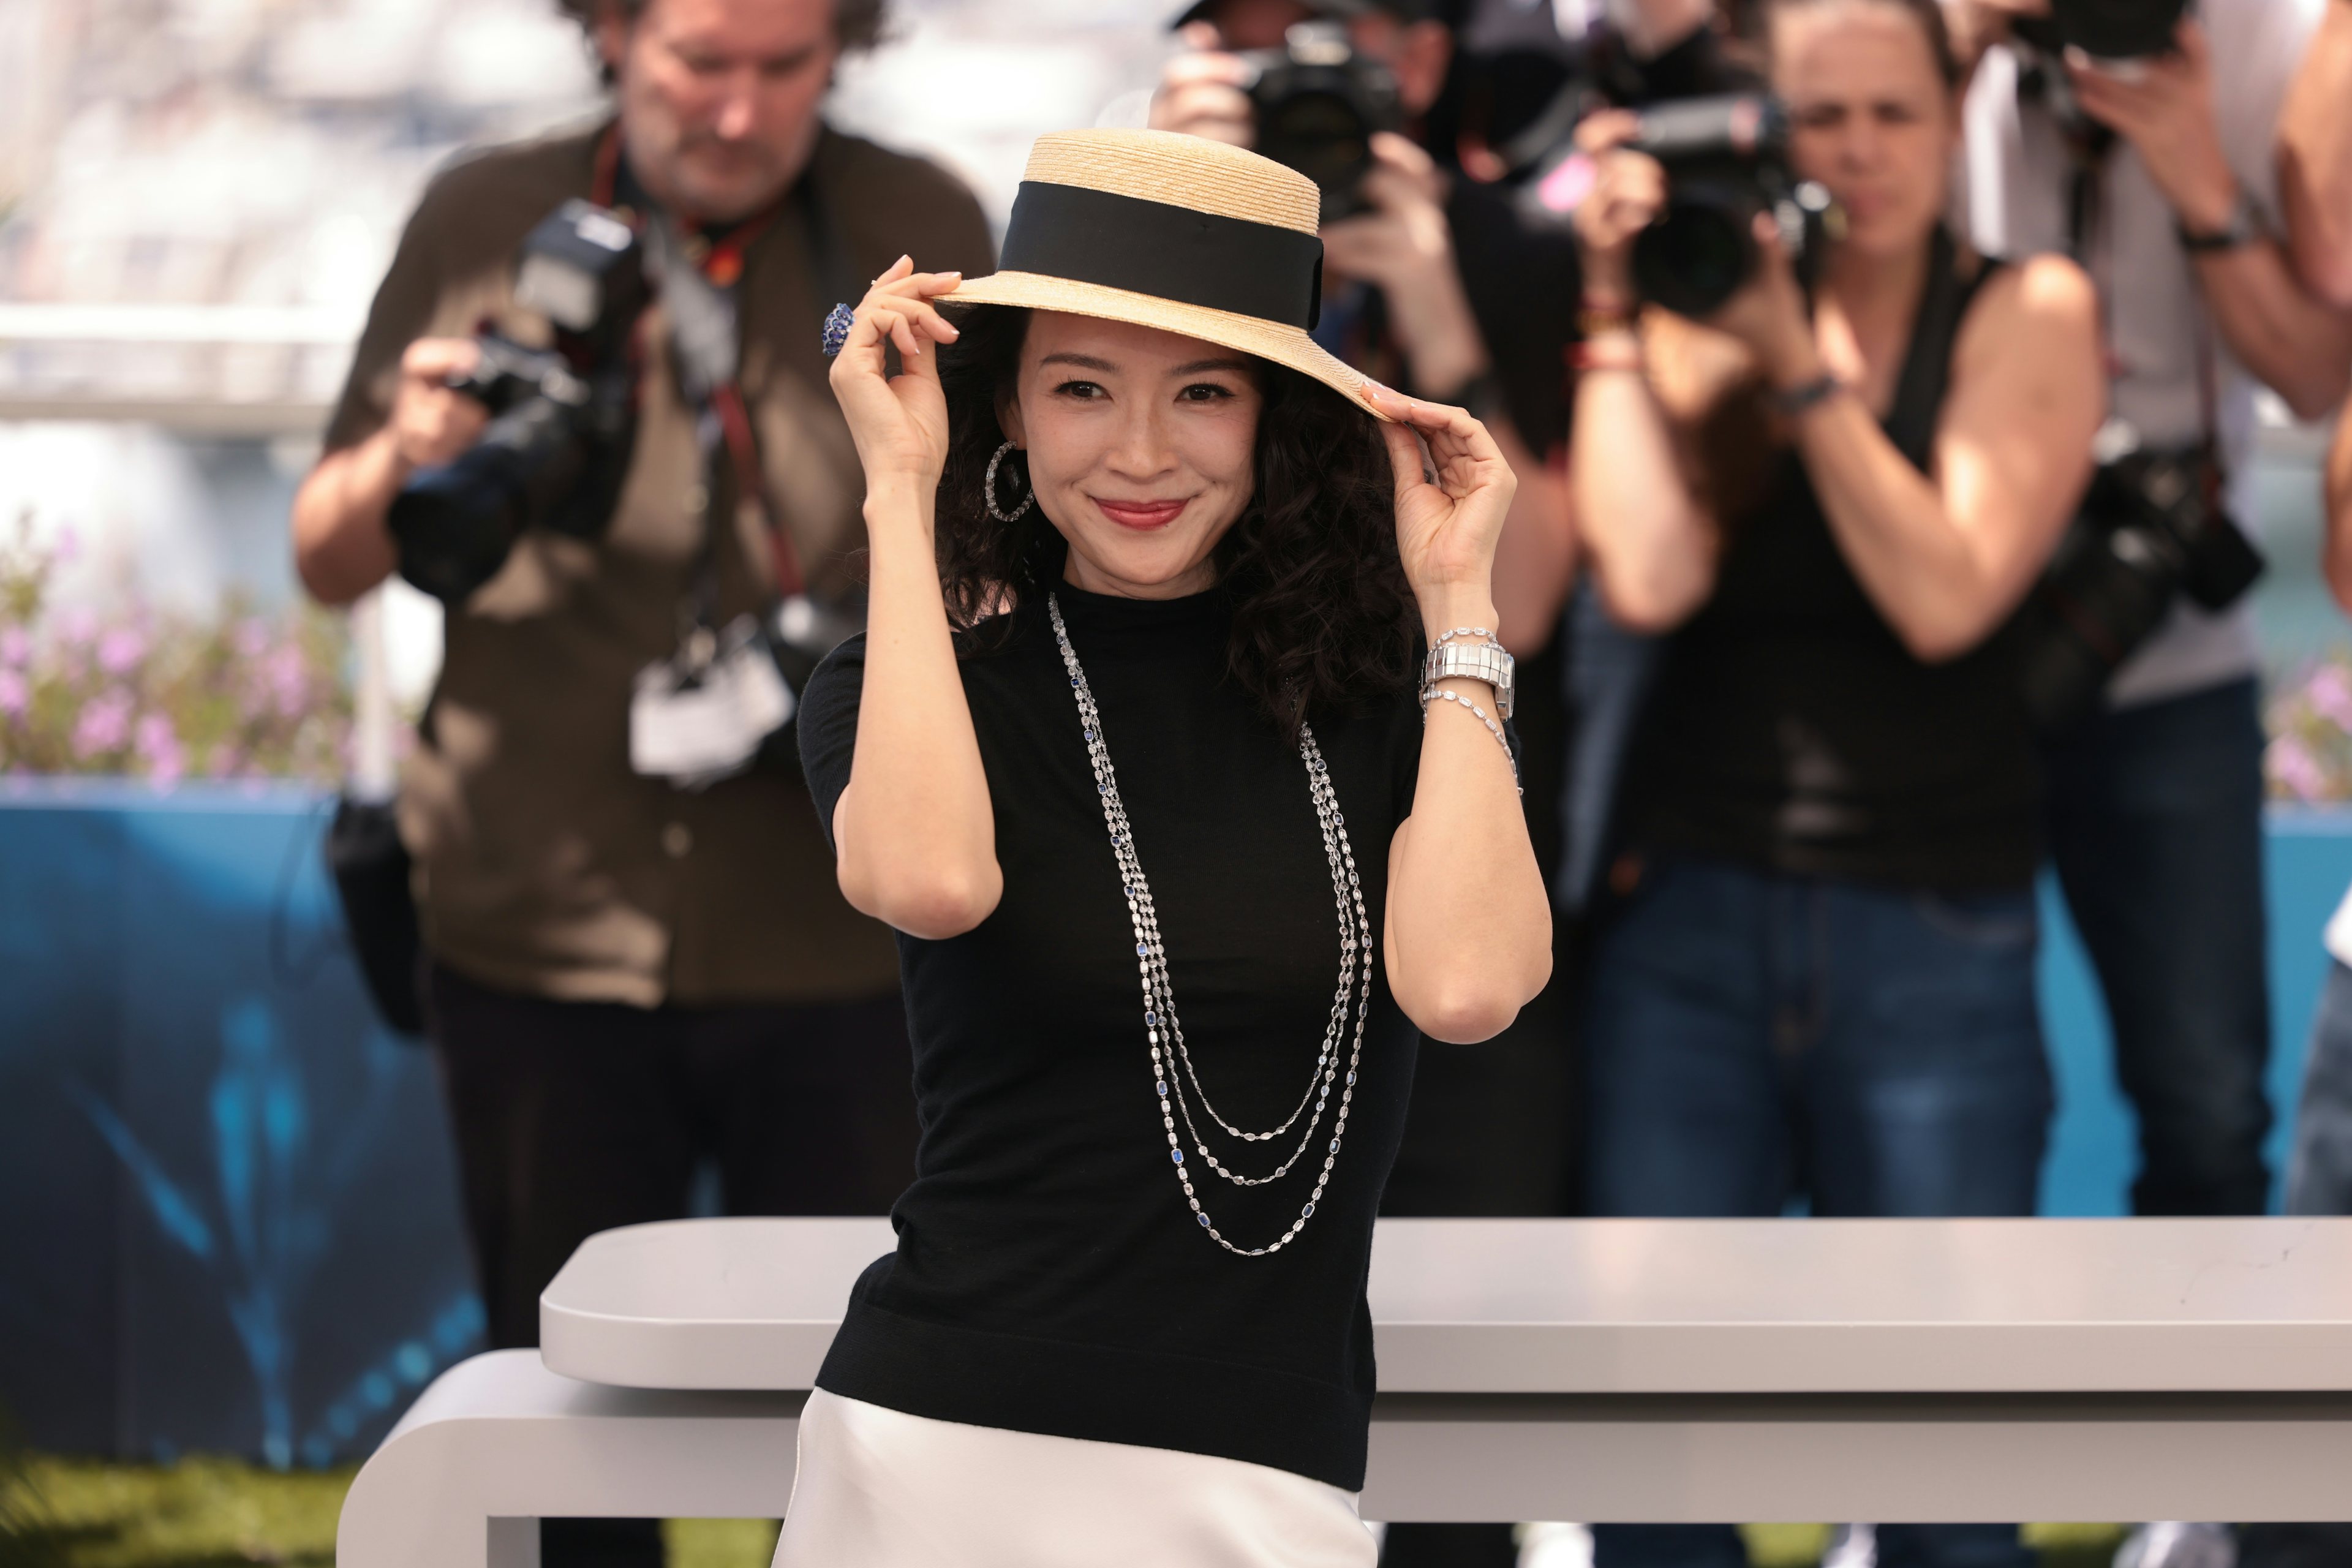 Zhang Ziyi's return to the Cannes Film Festival carpet garnered 30.39 million views on Weibo. Image: Getty Images